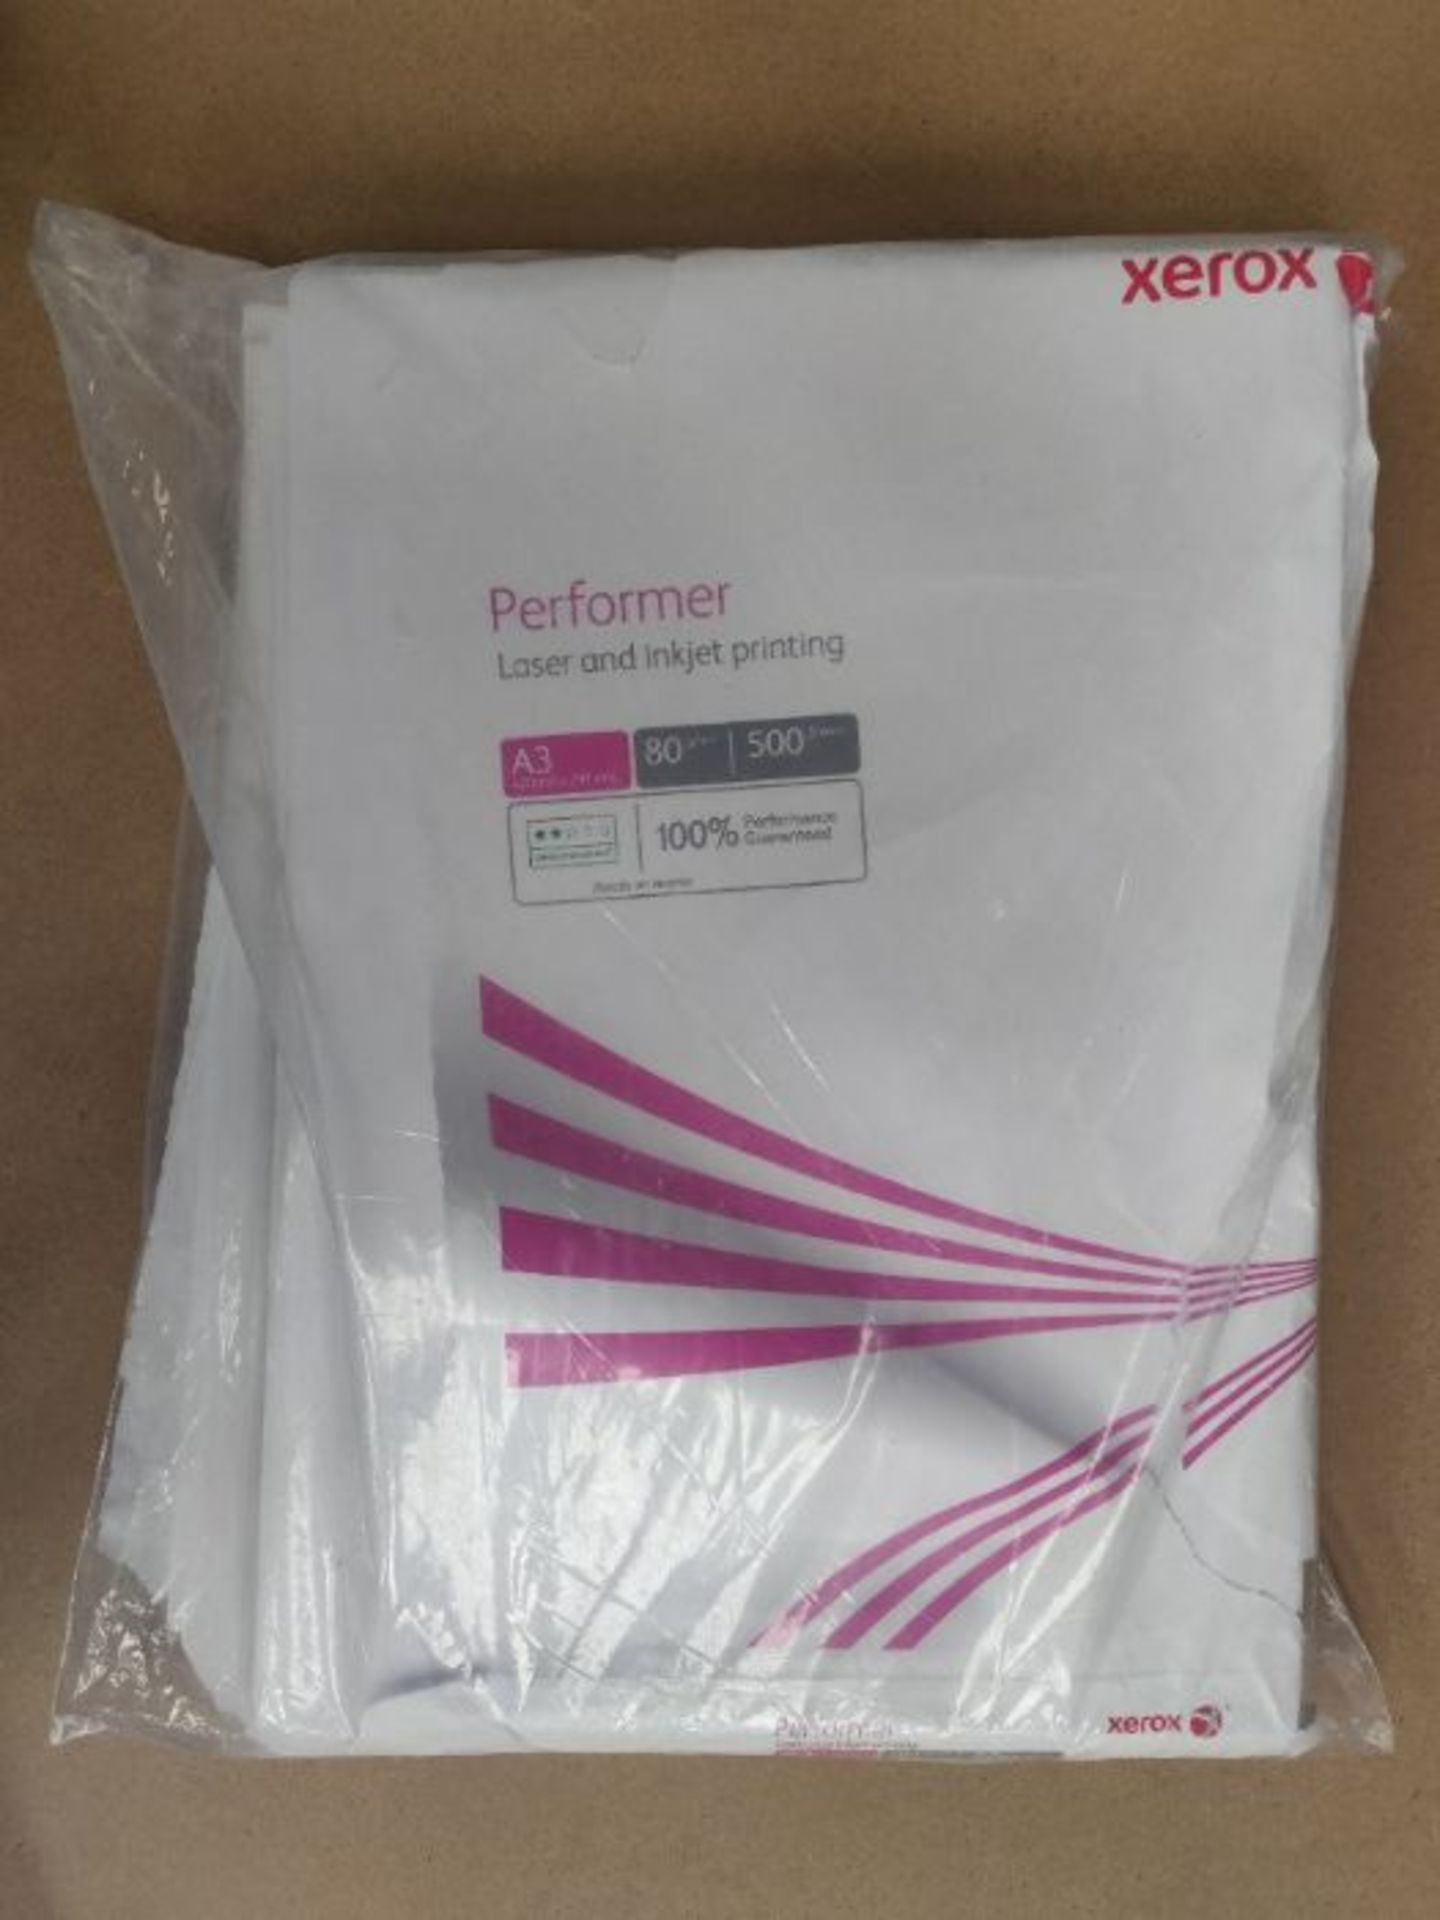 Xerox Performer Multifunctional Paper 80gsm 500 Sheets per Ream A3 White - Ref 003R905 - Image 2 of 2